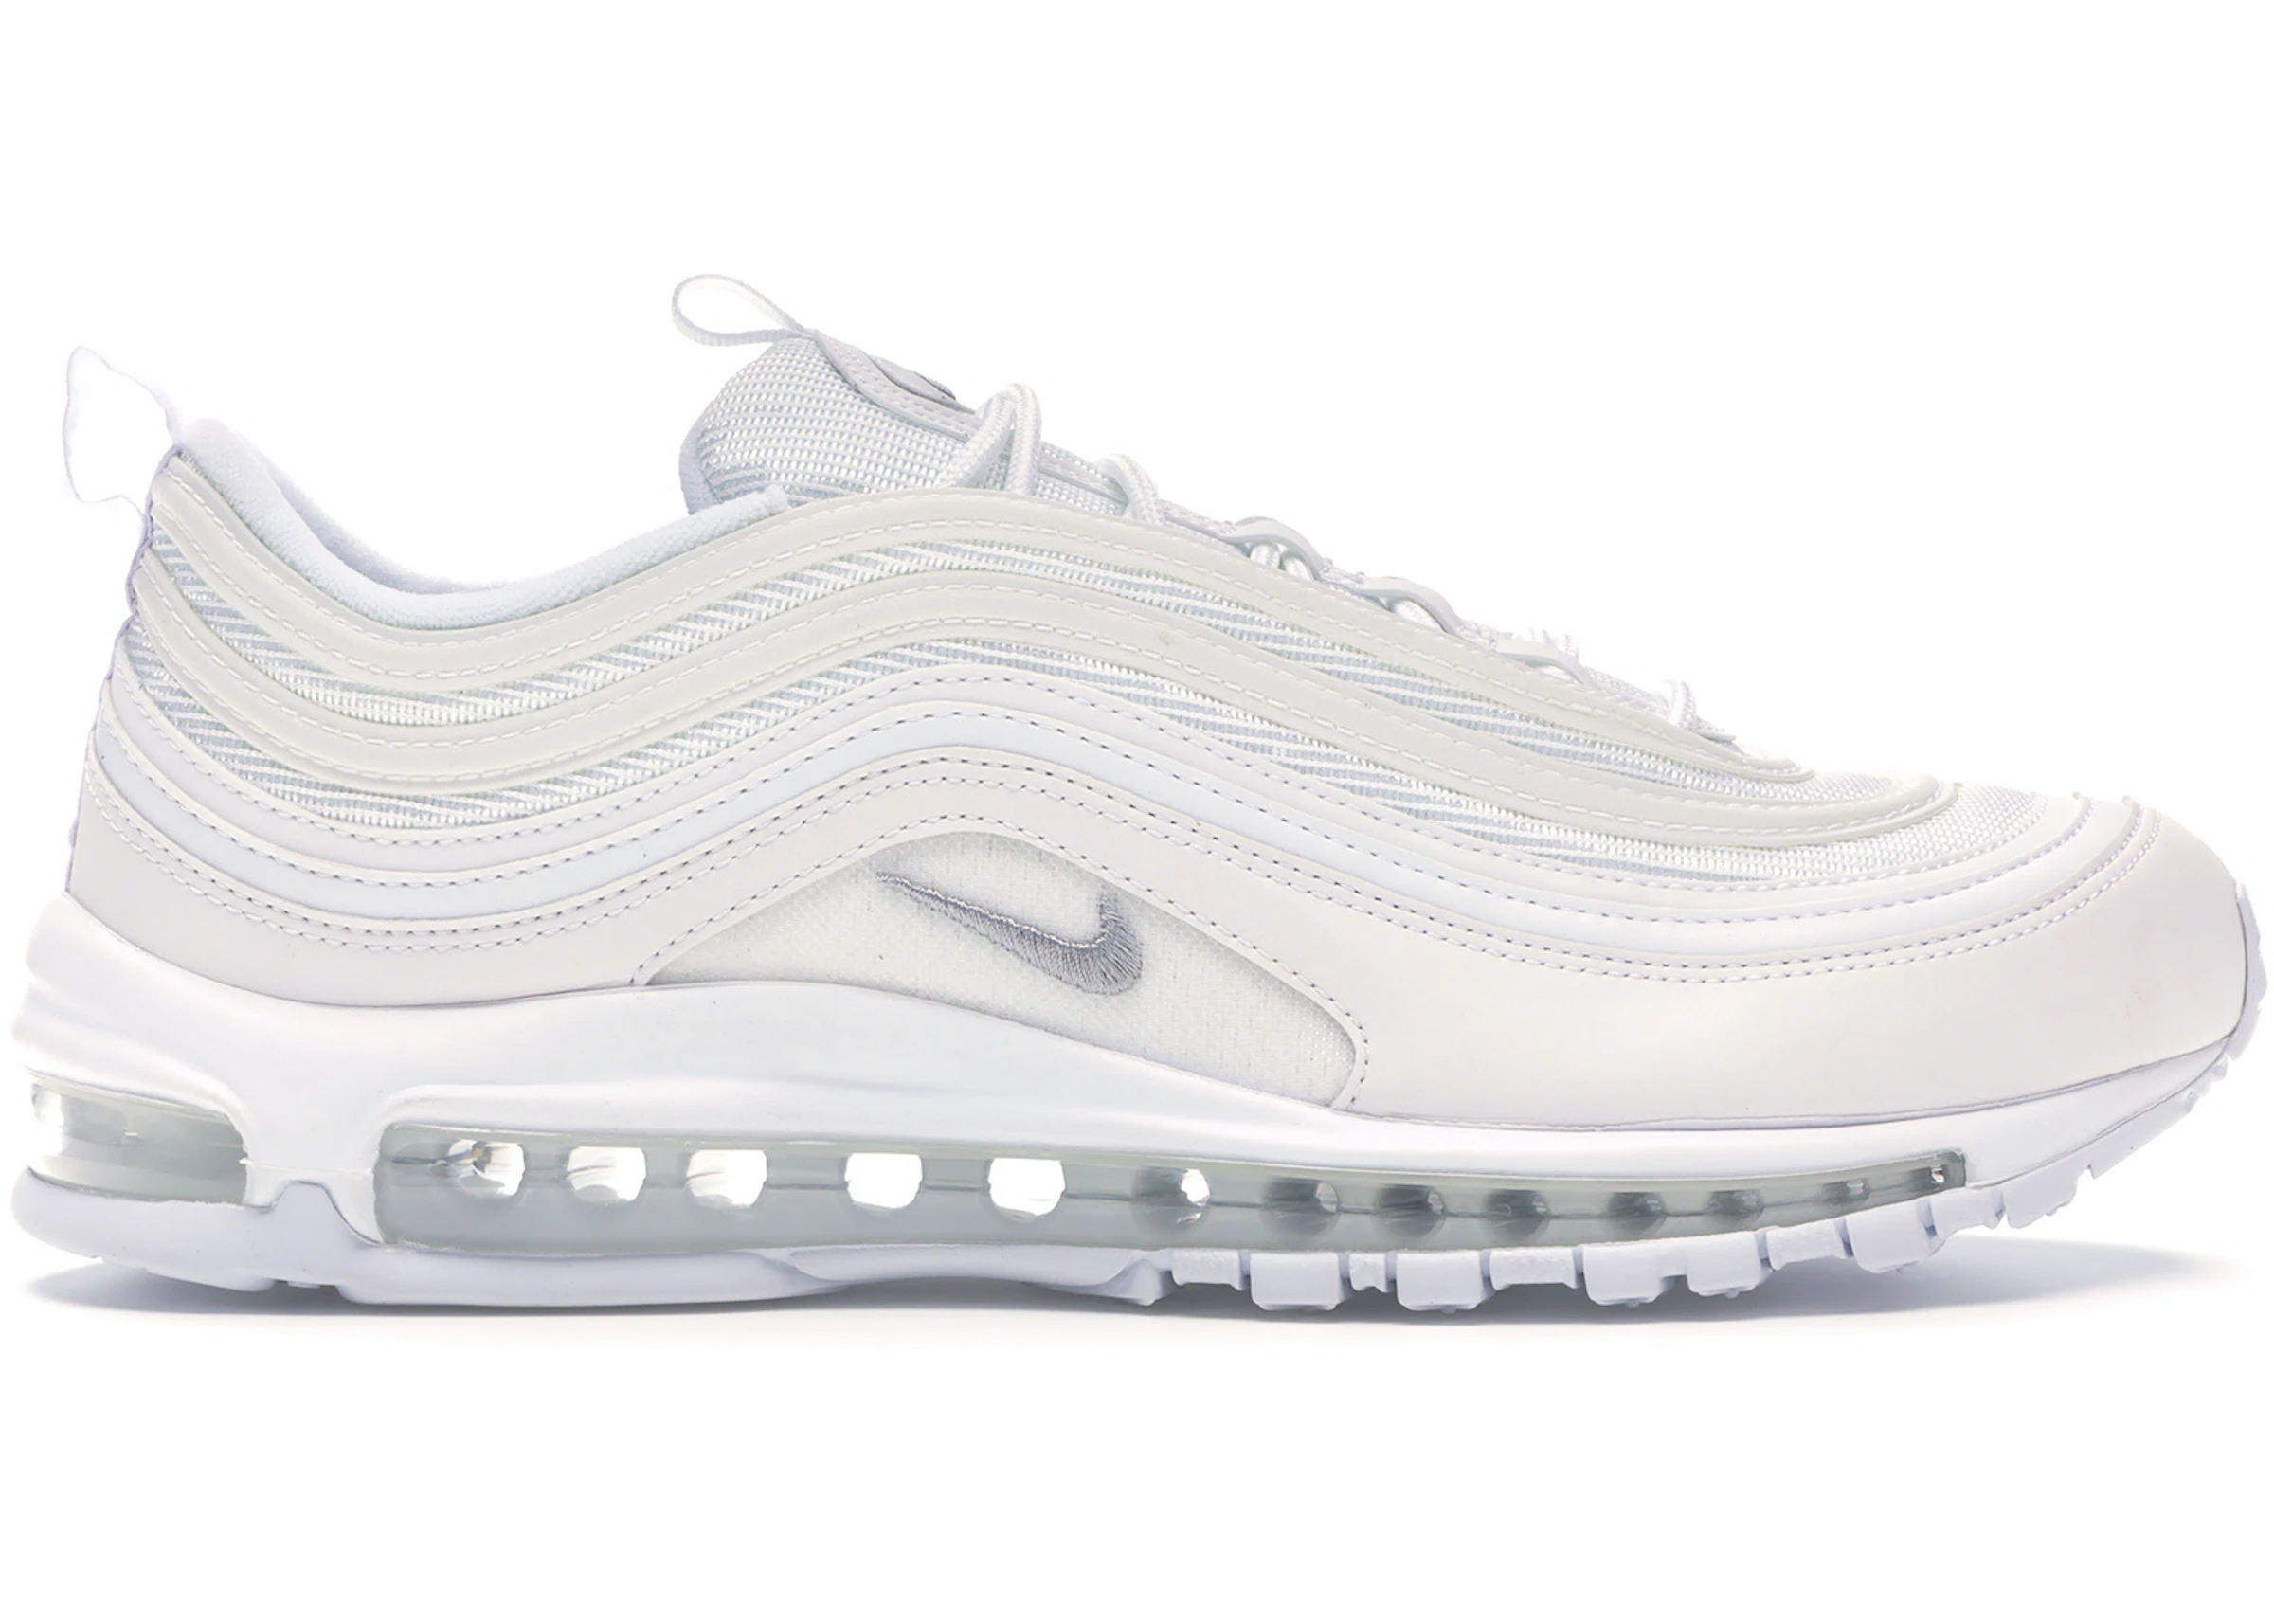 Buy Nike Air Max Shoes New - StockX